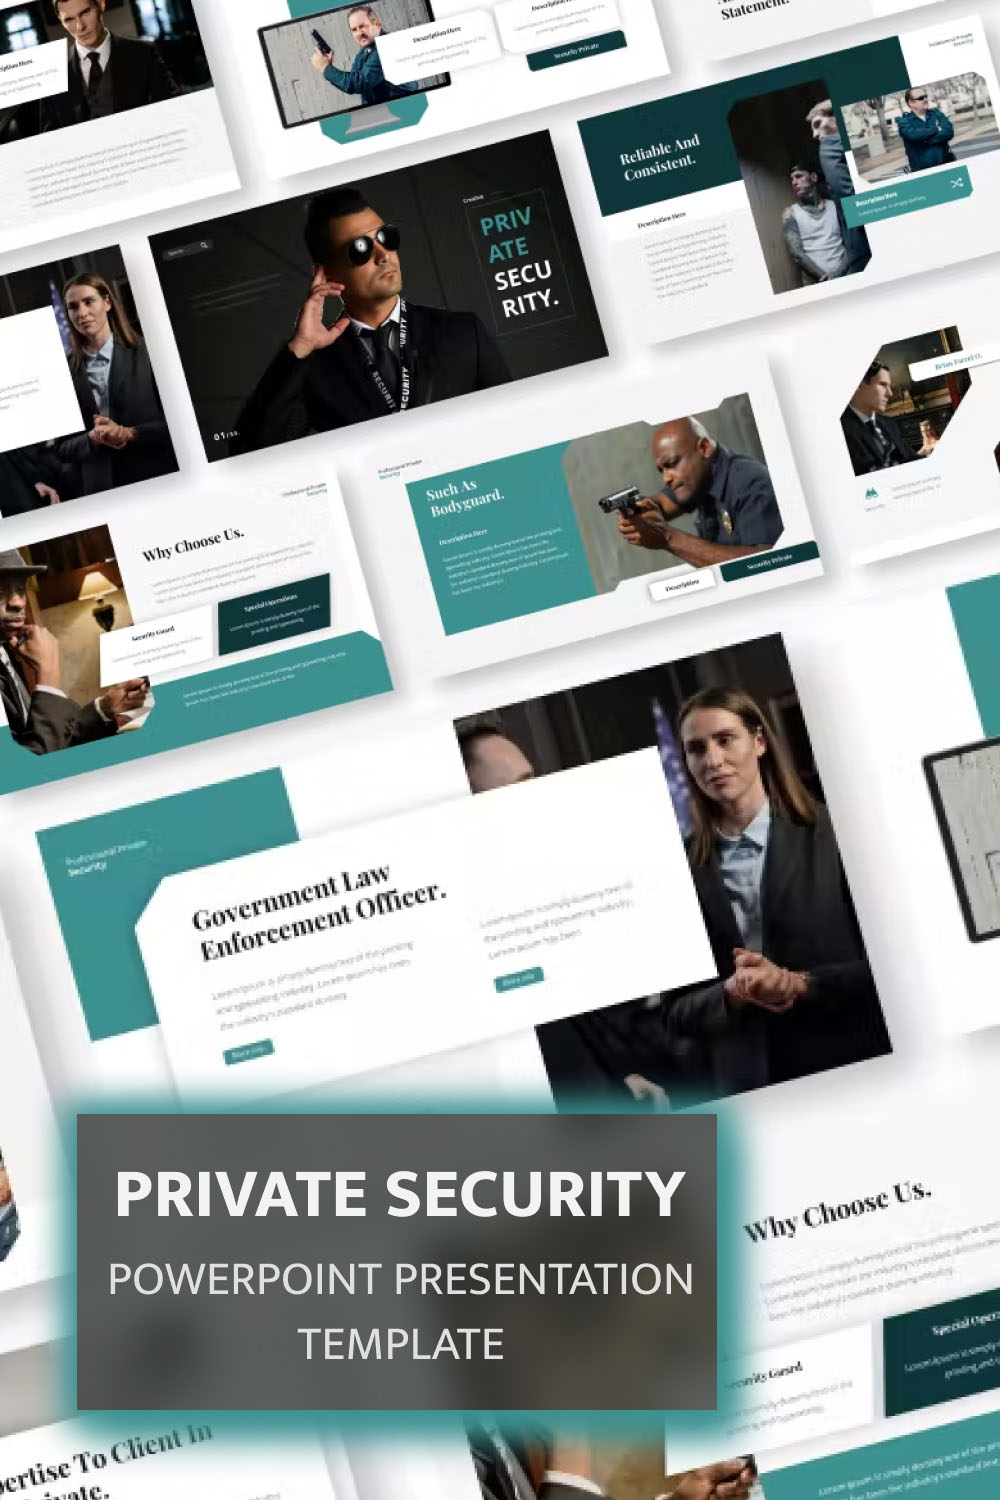 Private security powerpoint presentation template of pinterest.